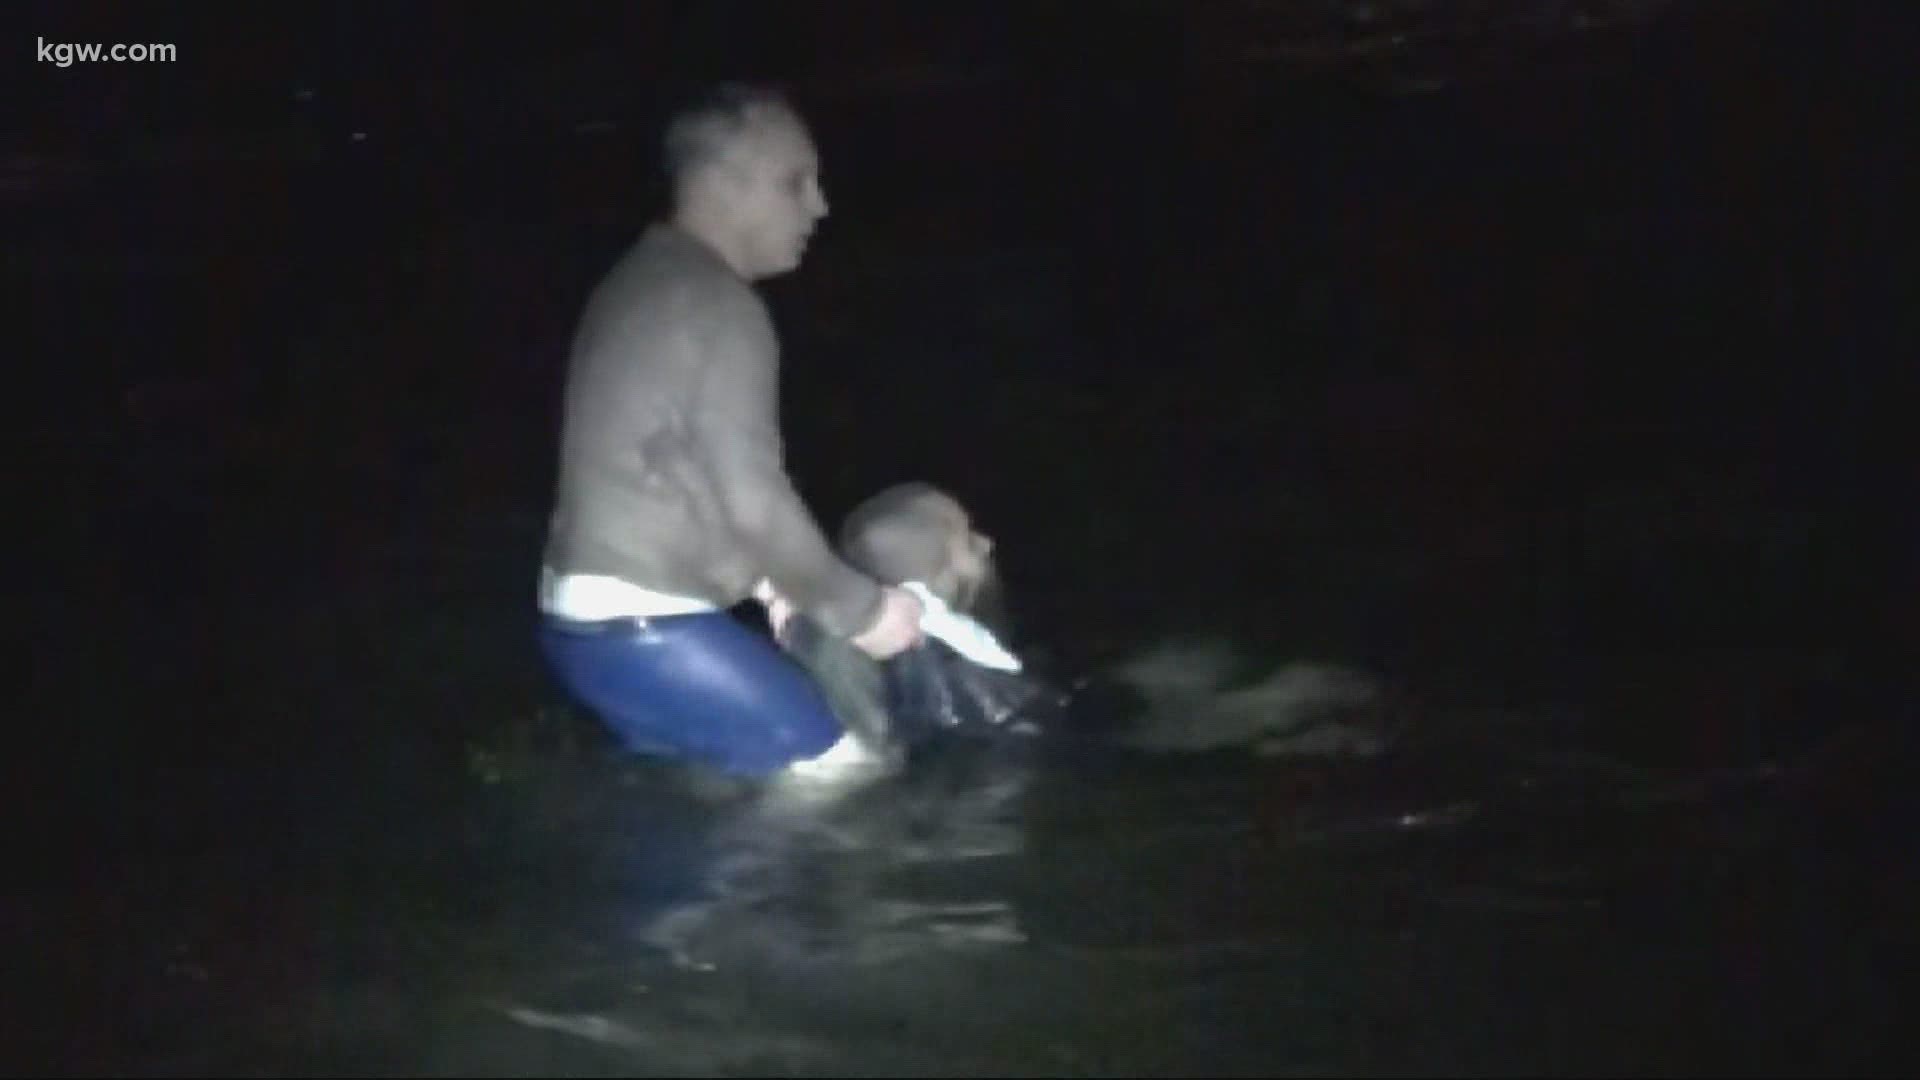 A Portland man pulled someone from the water at Alki Beach in Seattle Wednesday night.